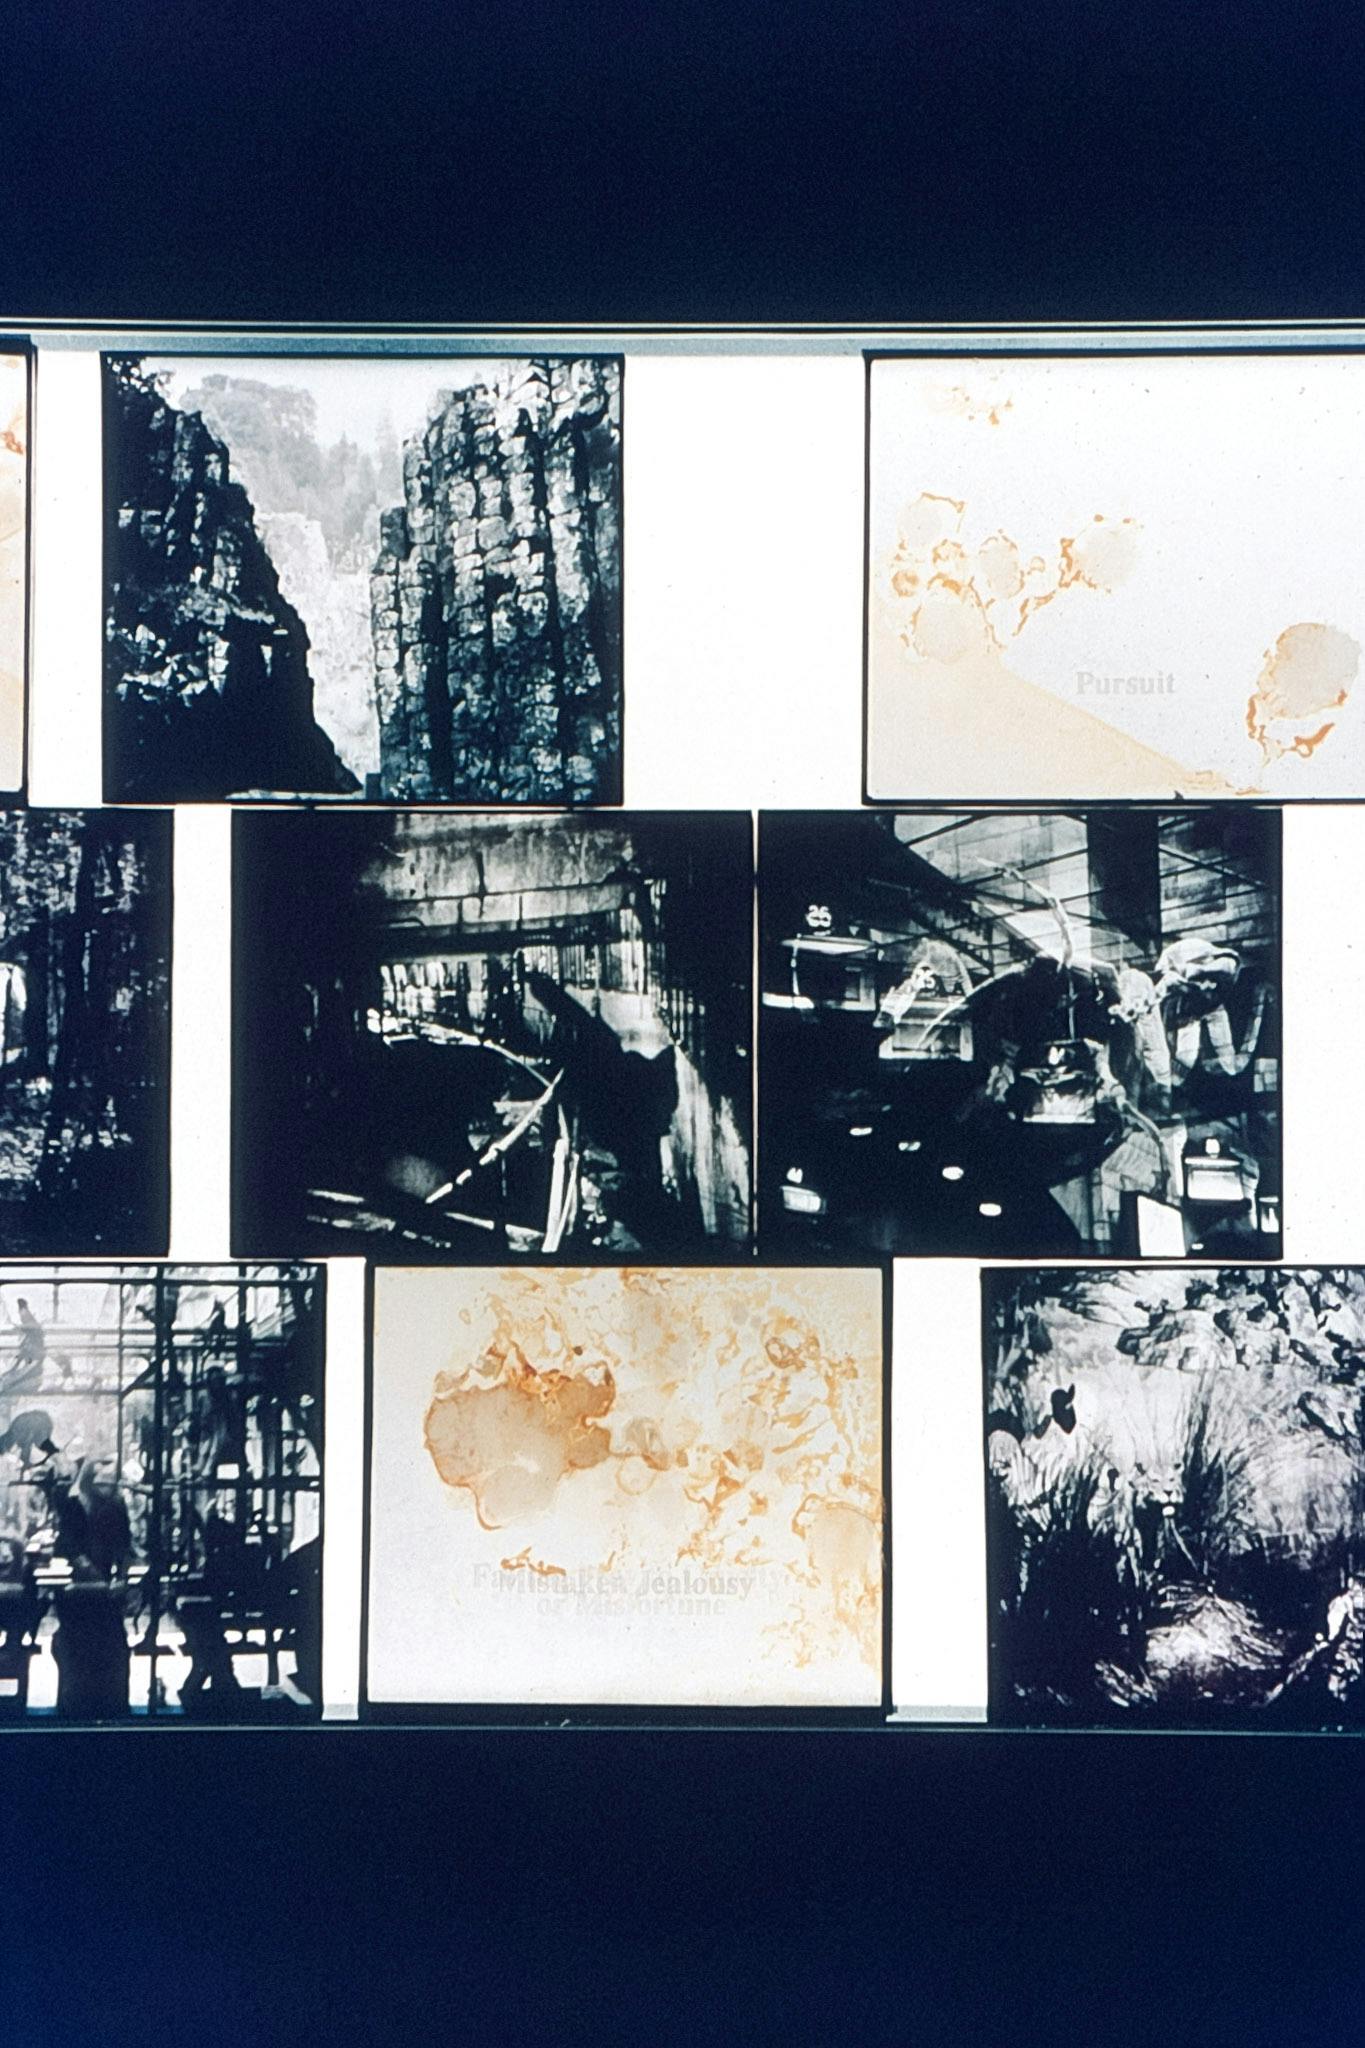 Several photo-transparencies against a glowing white background. The images in them are of cliffs and buildings, as well as yellow stains and layered text. One of the slides with text reads "Pursuit." 